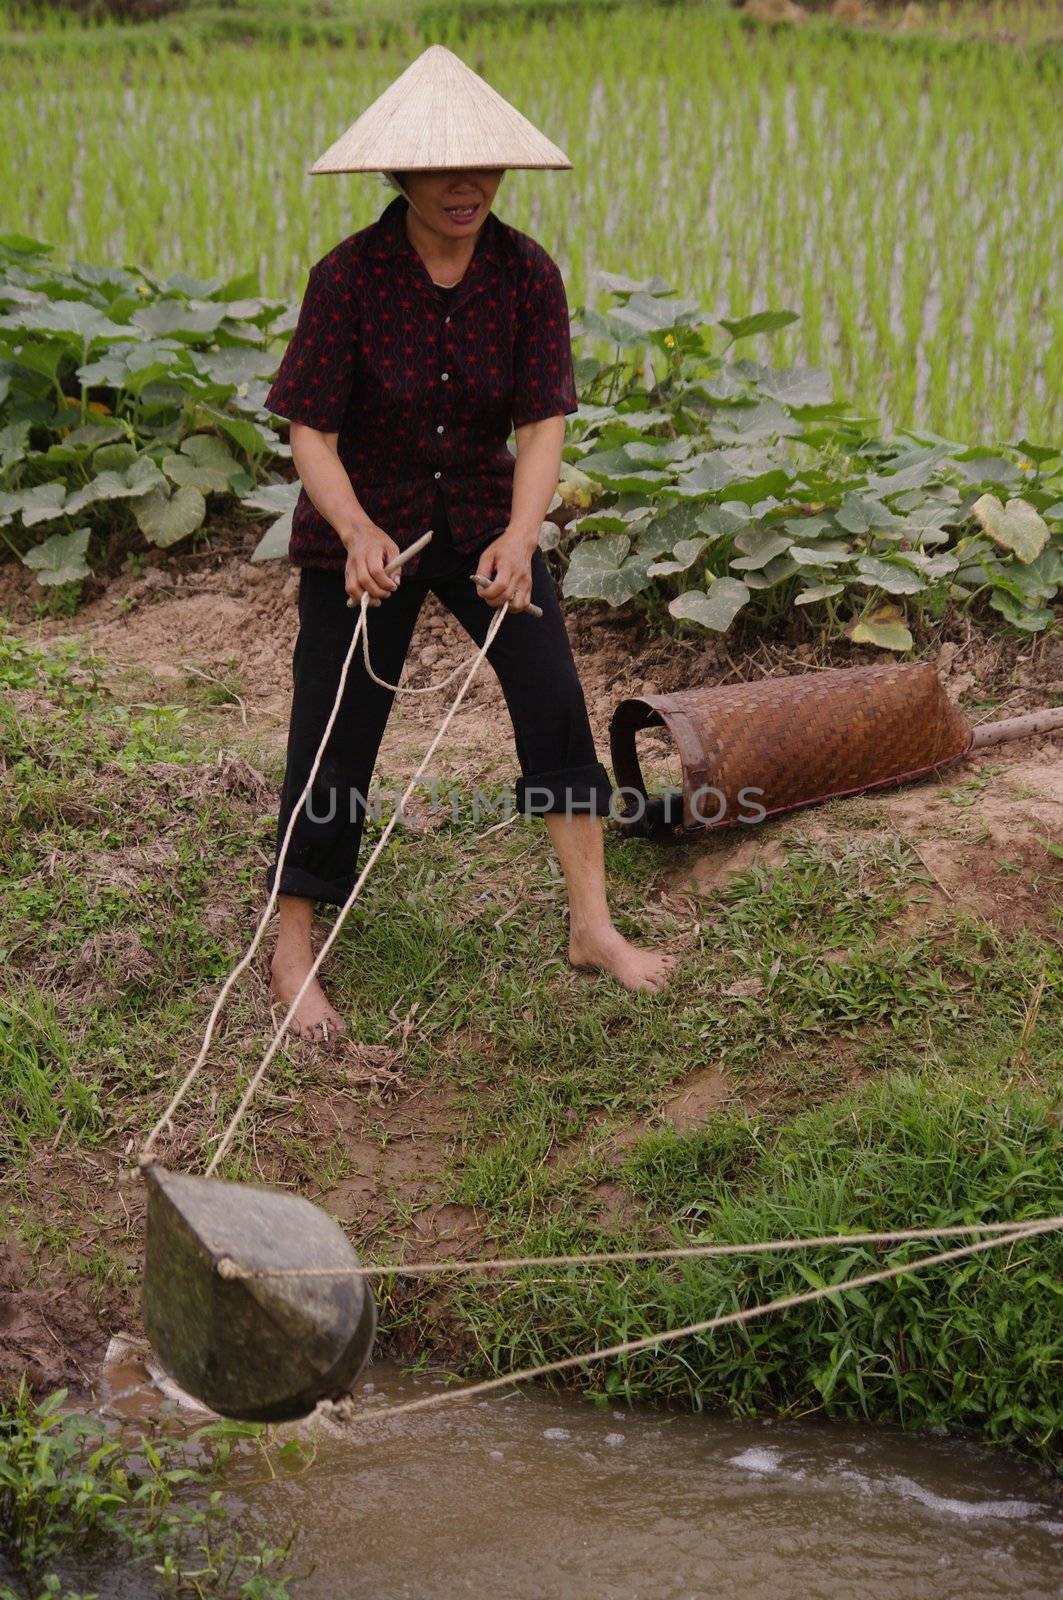 Irrigation Manual of ricefield by Duroc